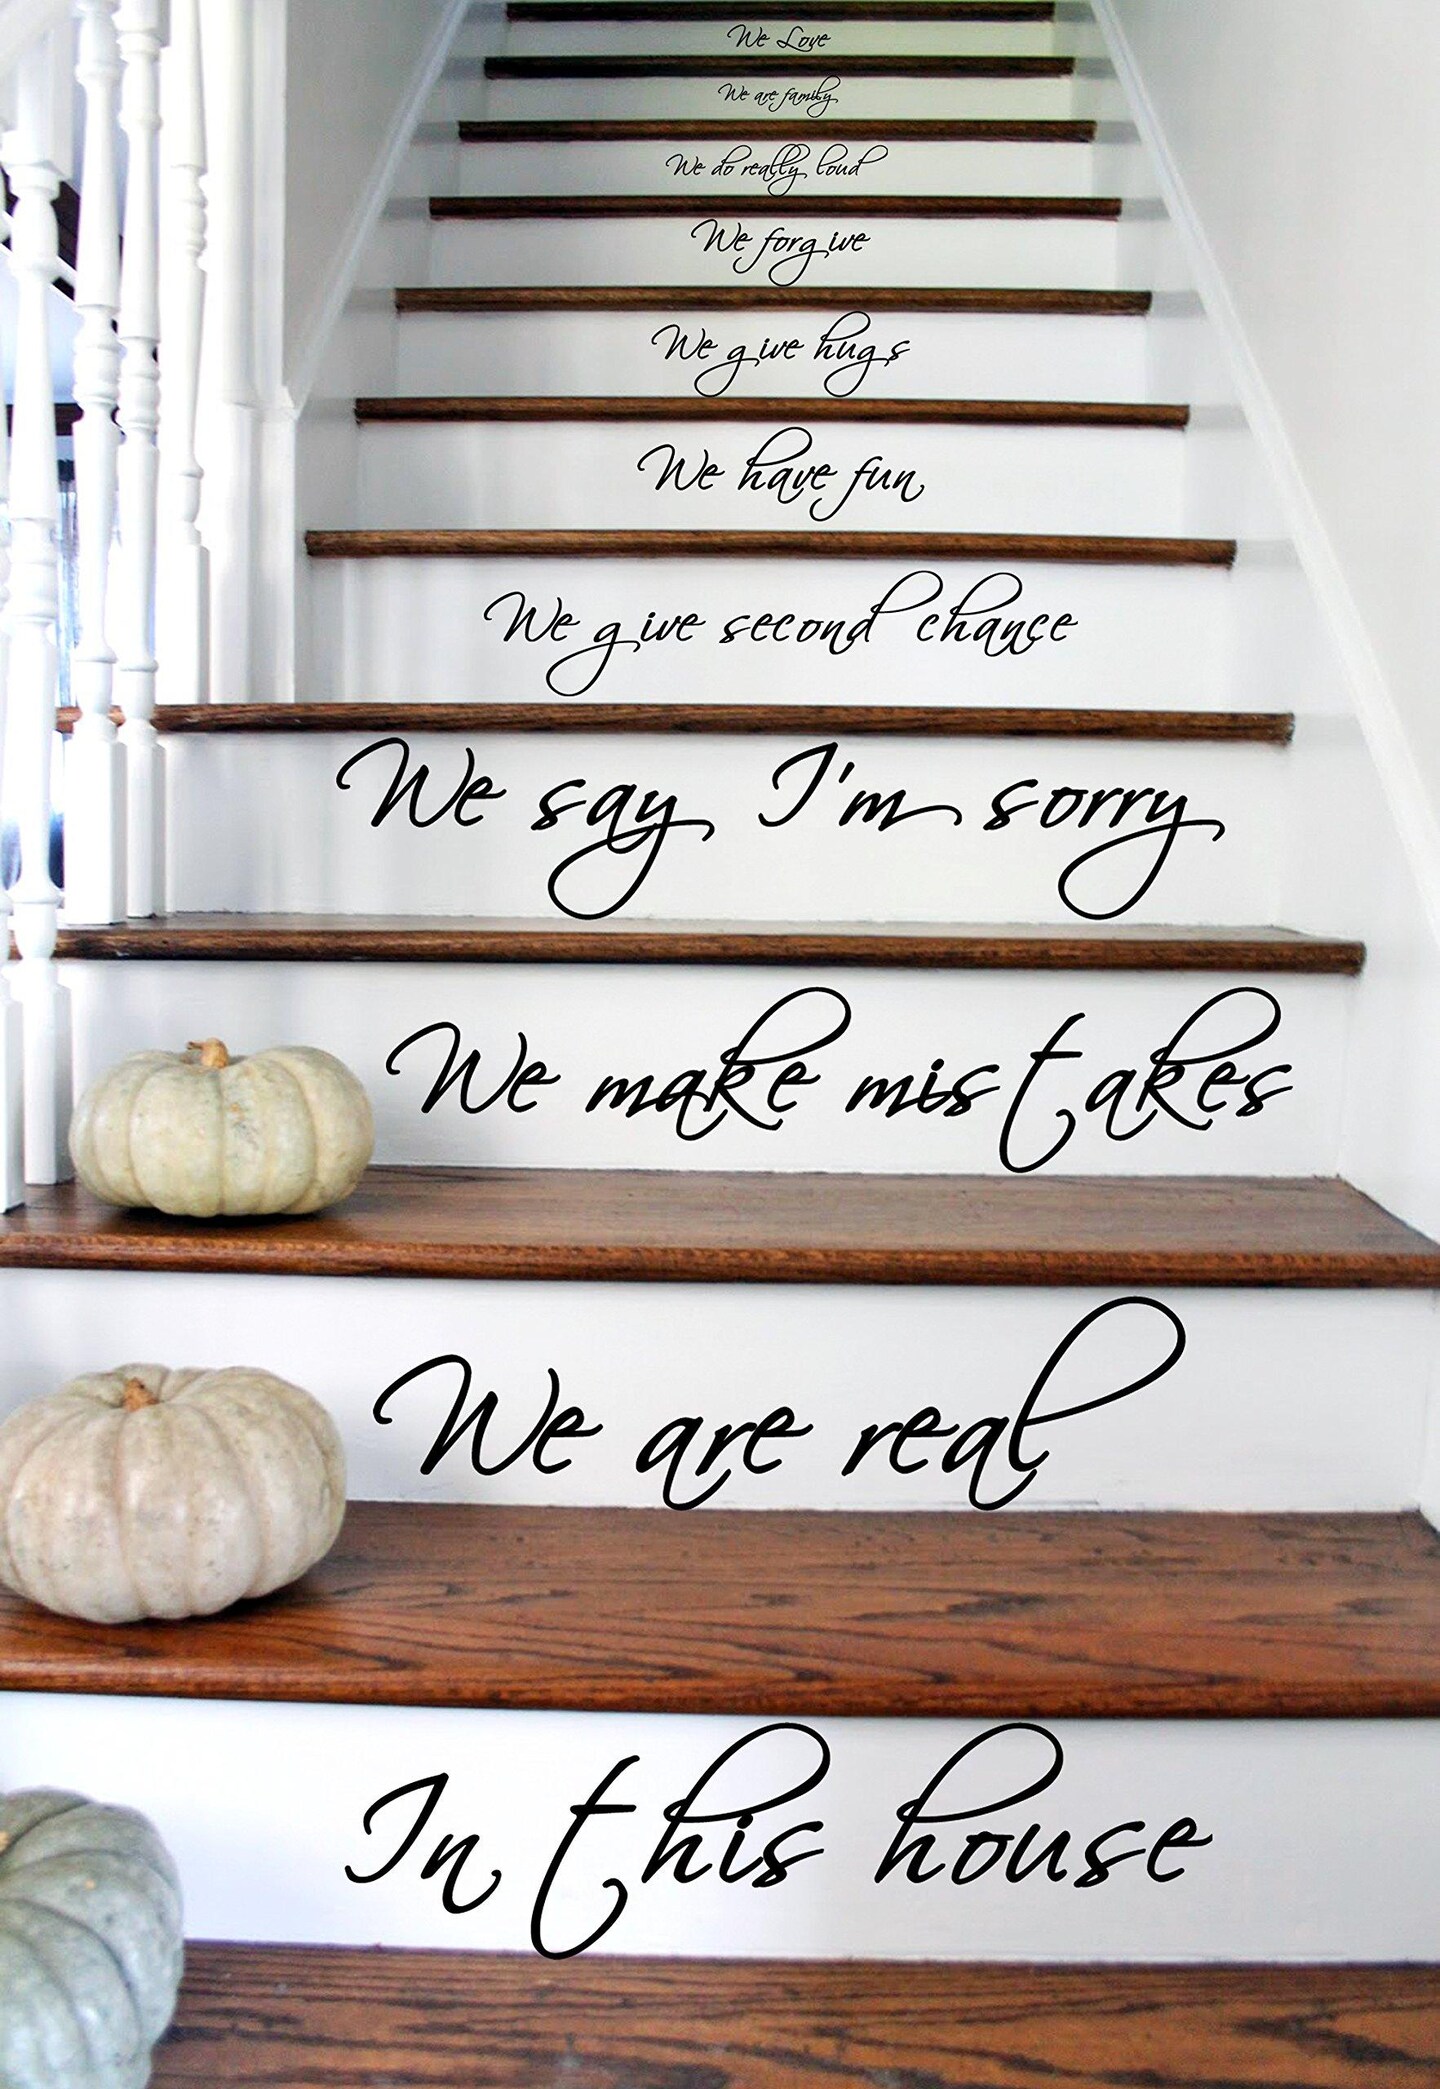 (22  X 39 ) Vinyl Stairs Decal Quote in This House We are Family We Love Do   Inspirational Text Wall Art Decor Home Sticker   Free Random Decal Gift